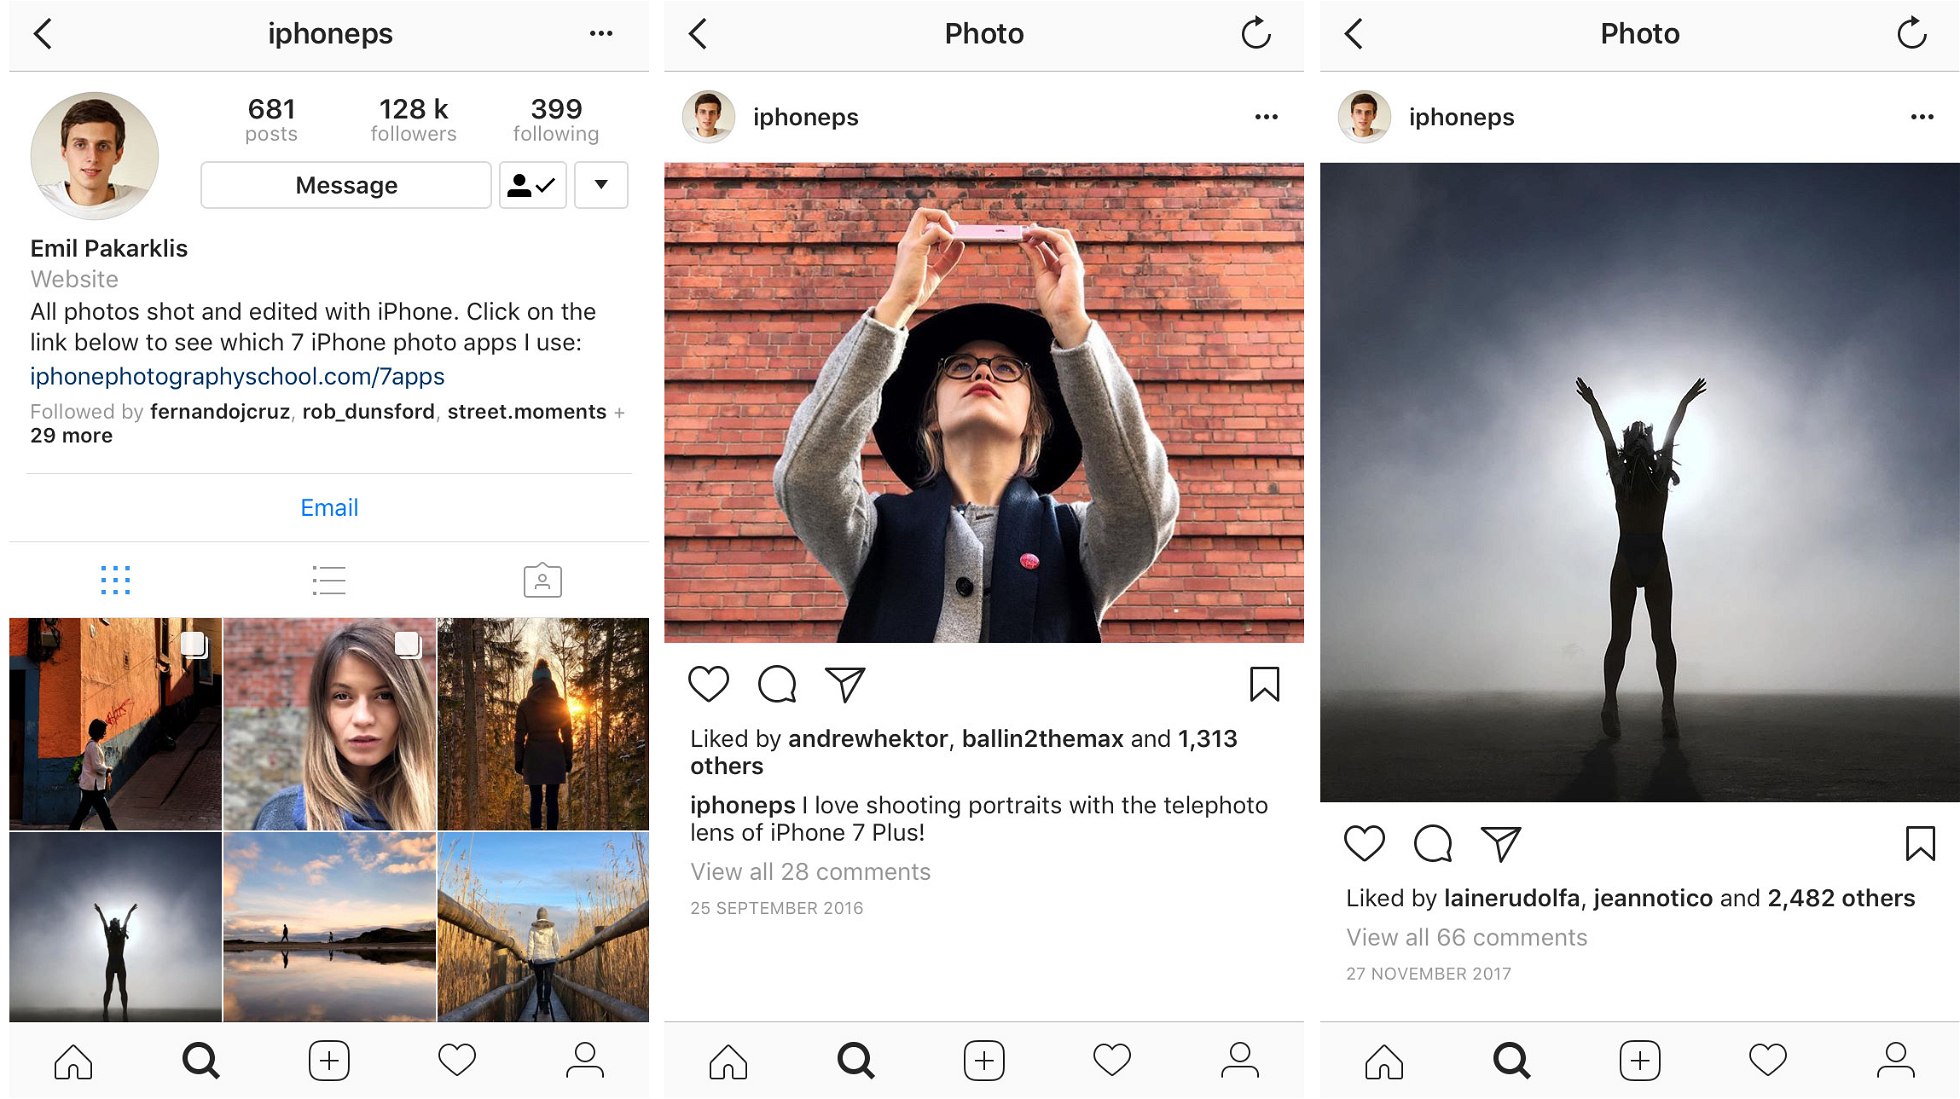 How To Become Instagram Famous In 3 Easy Steps - 2298 x 1289 jpeg 1157kB